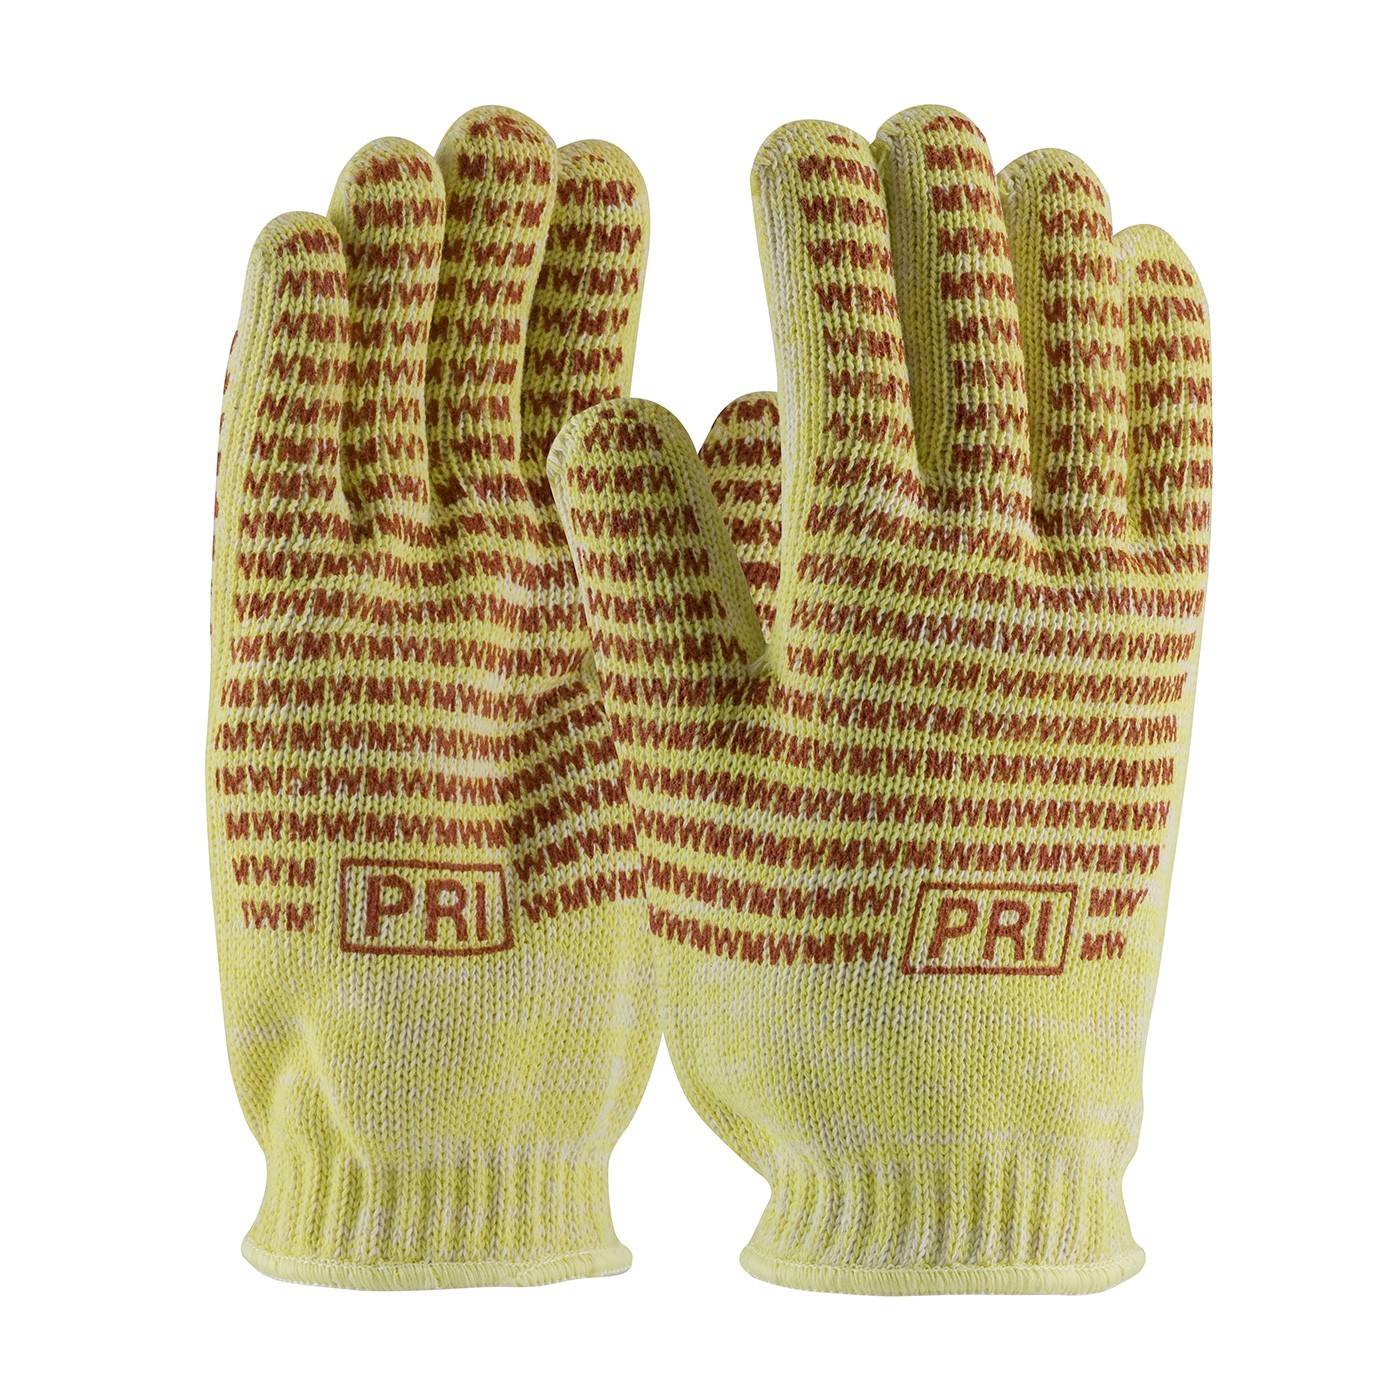 PIP® Kevlar® / Cotton Seamless Knit Hot Mill Glove with Cotton Liner and Double-Sided EverGrip™ Nitrile Coating - 24 oz  (#43-552)